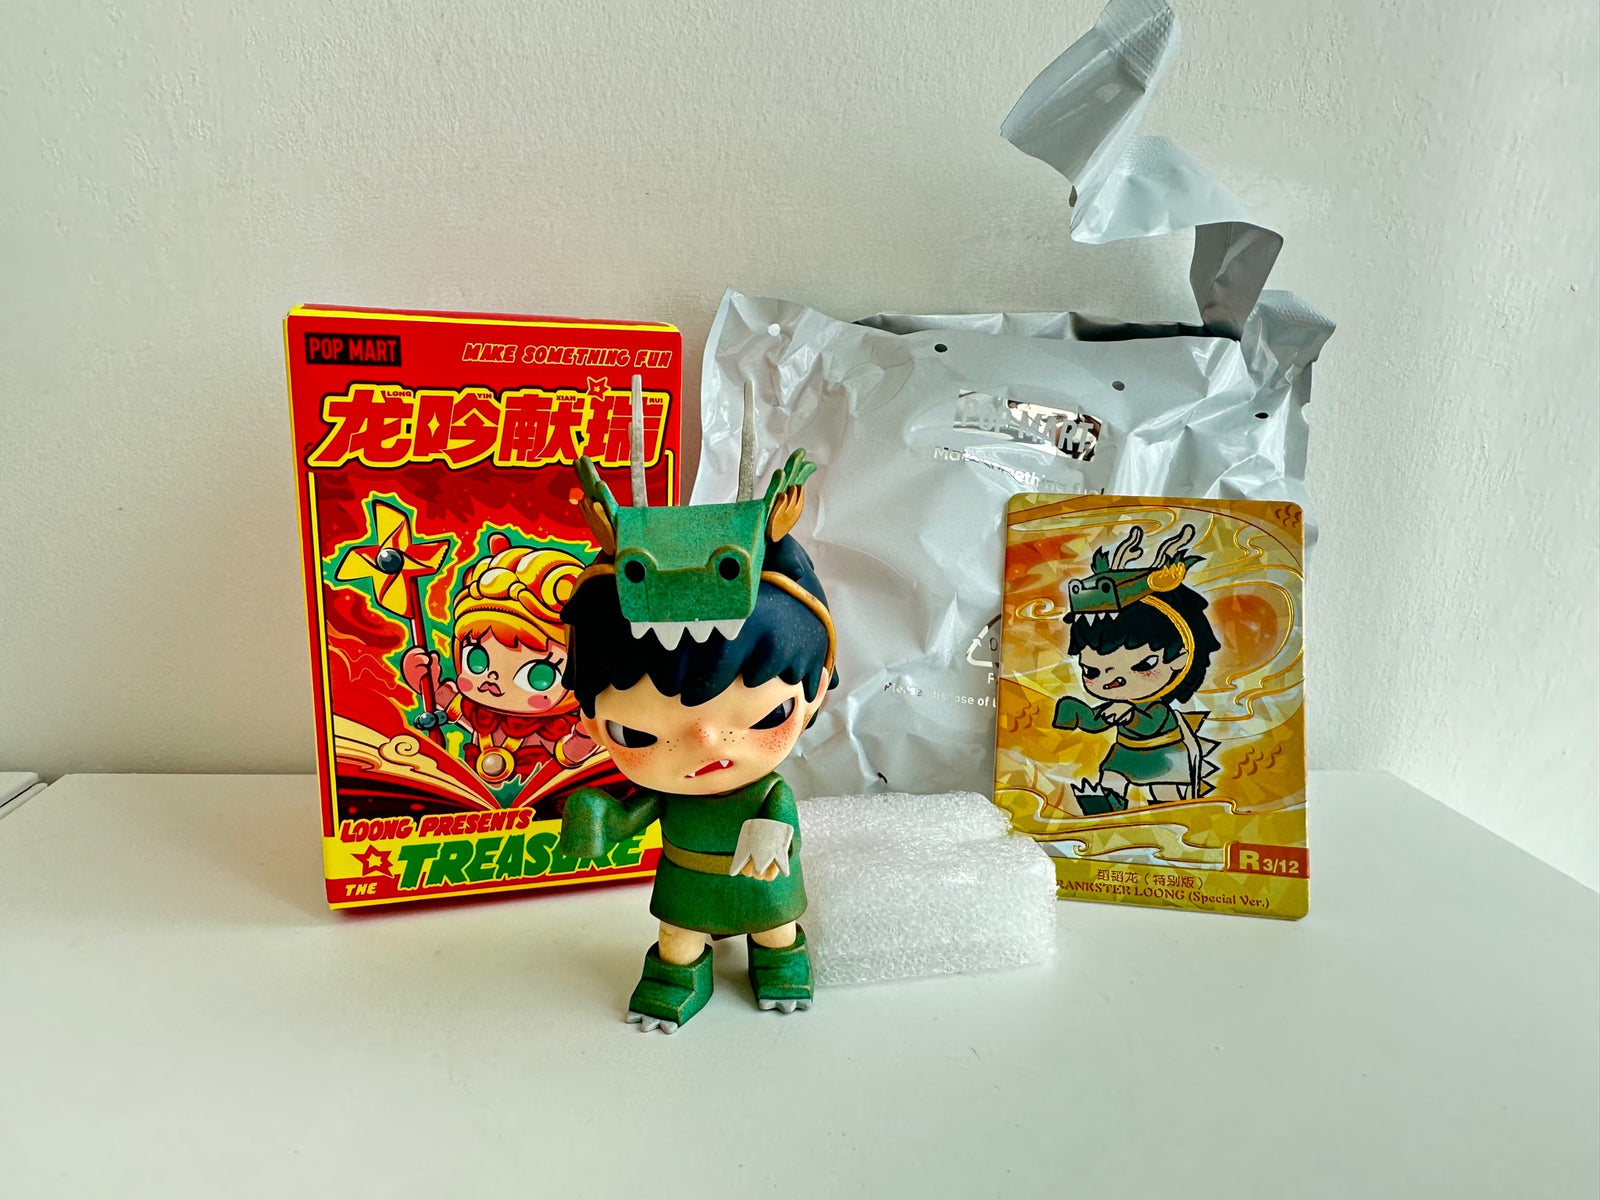 (Hirono) PRANKSTER LOONG (Special Version) - Loong Presents the Treasure Series Figures by POP MART - 1